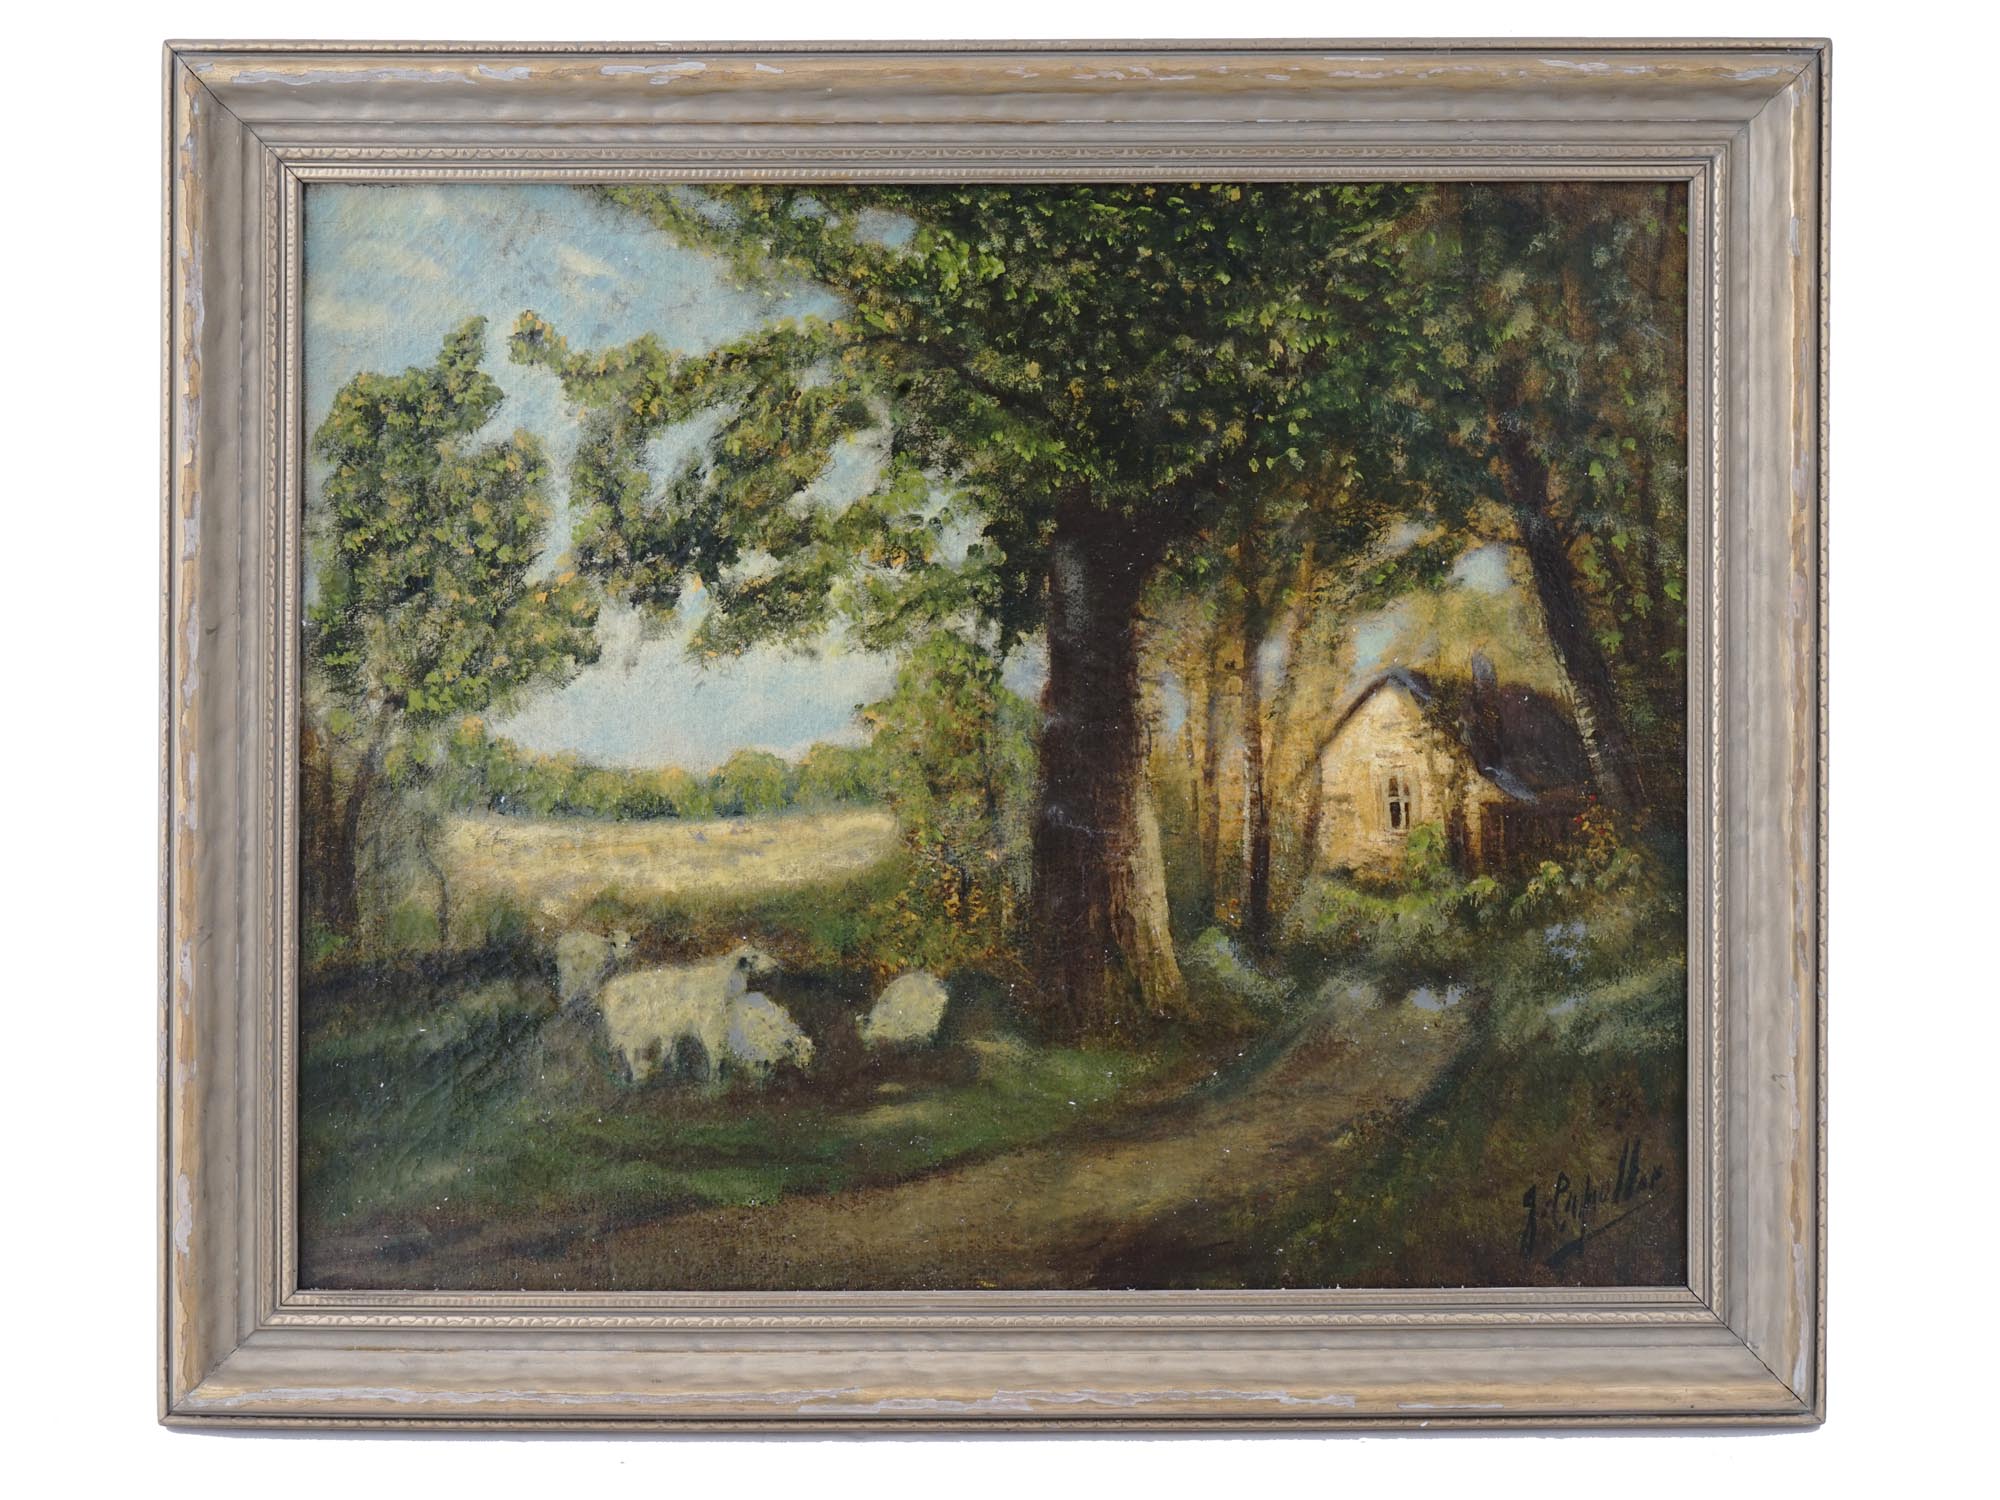 EUGENE CAPELLE ANTIQUE 19TH C FRENCH OIL PAINTING PIC-0